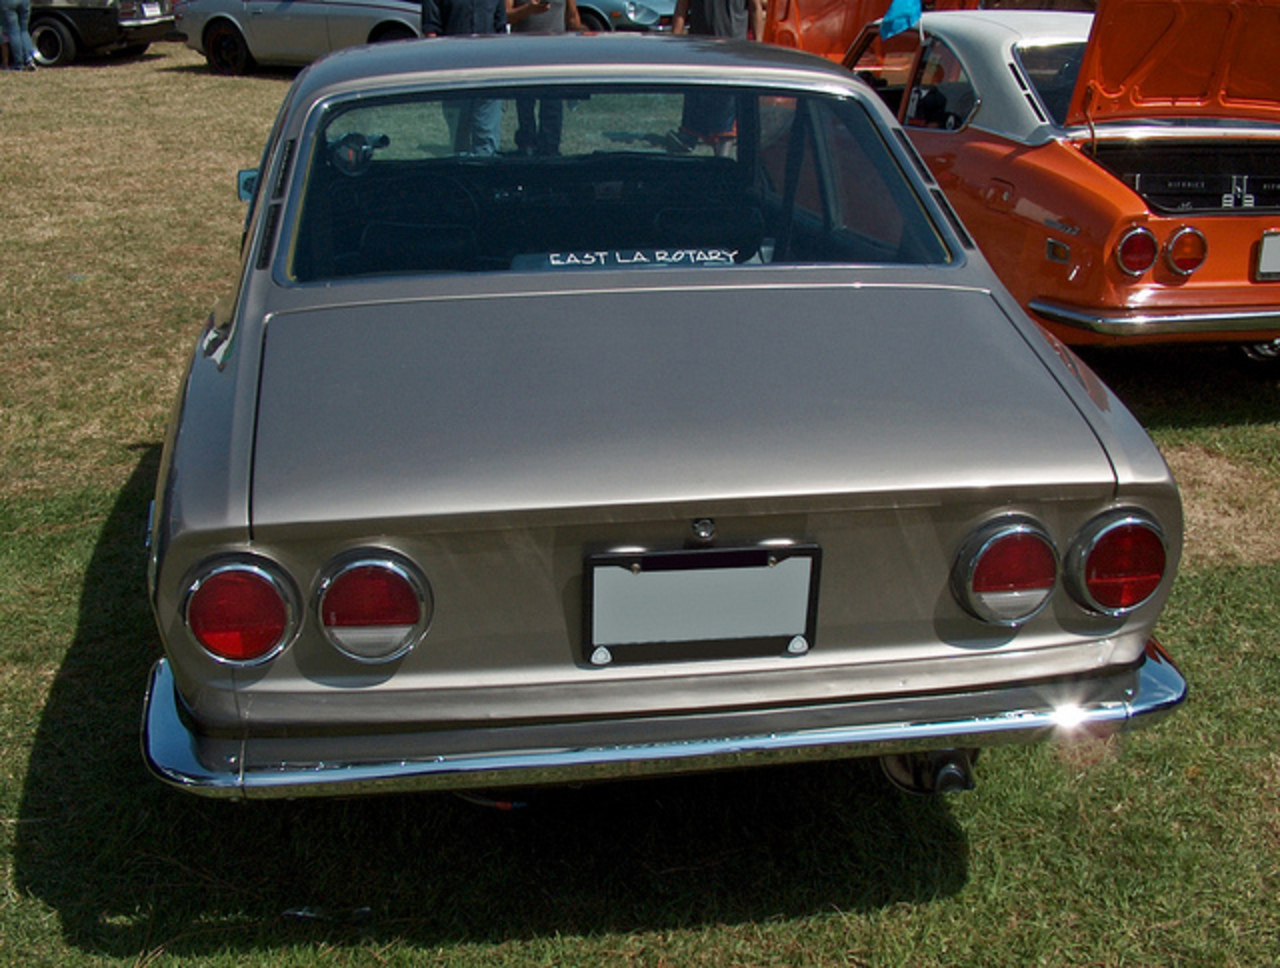 1972 Mazda RX-2 Coupe rear | Flickr - Photo Sharing!